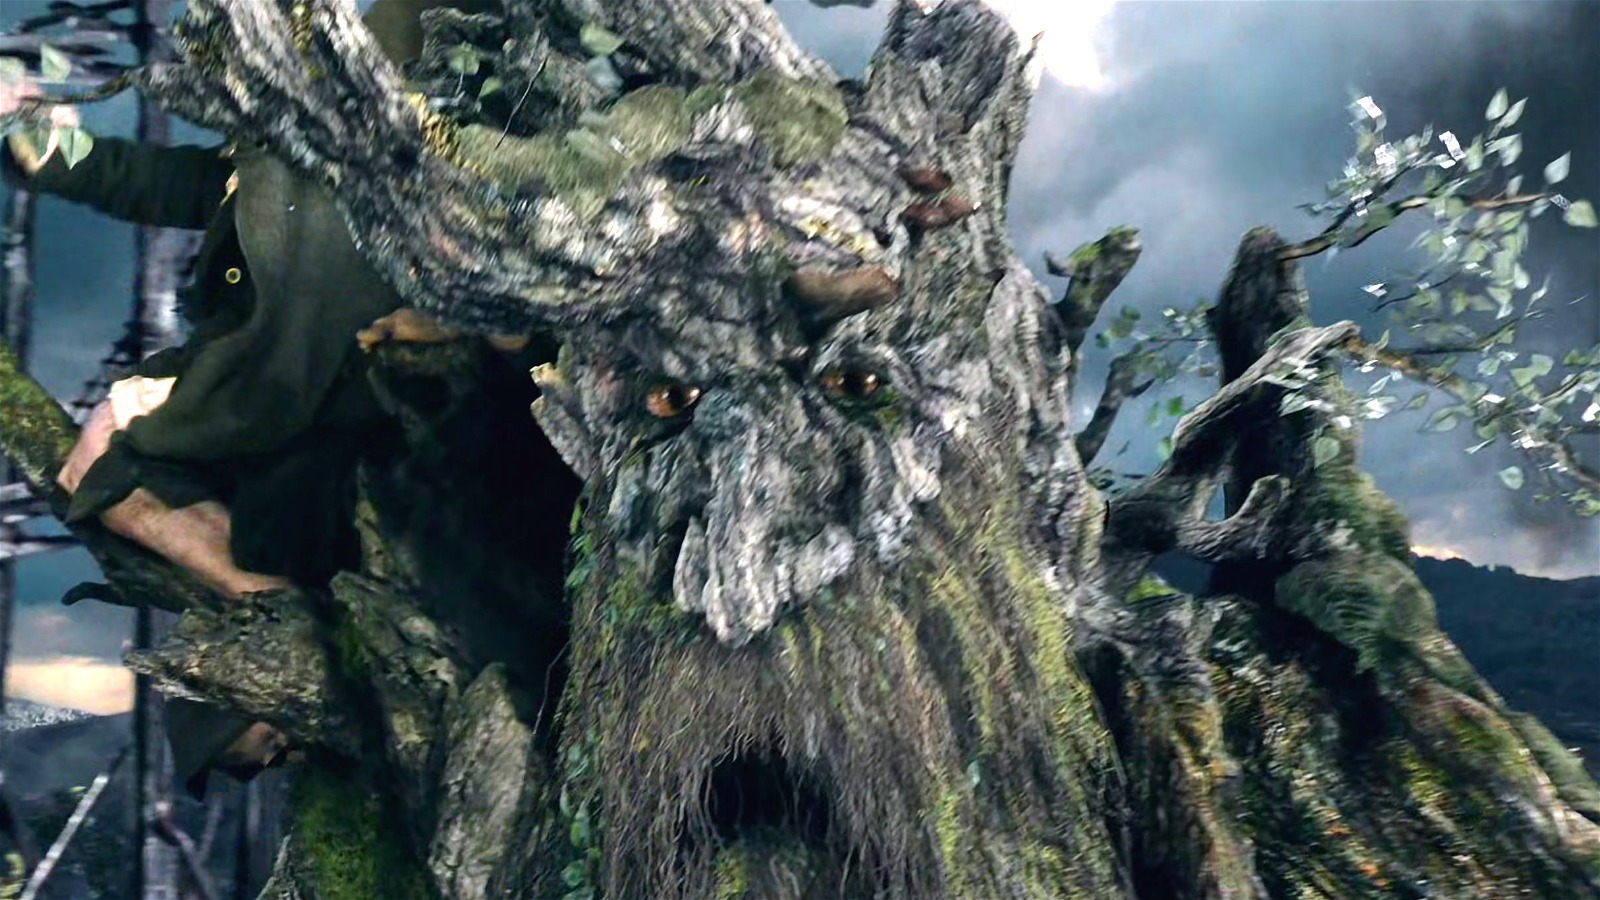 Tolkien's Hobbits, a Black Rider, and a Tree Root: chasing a visual chain